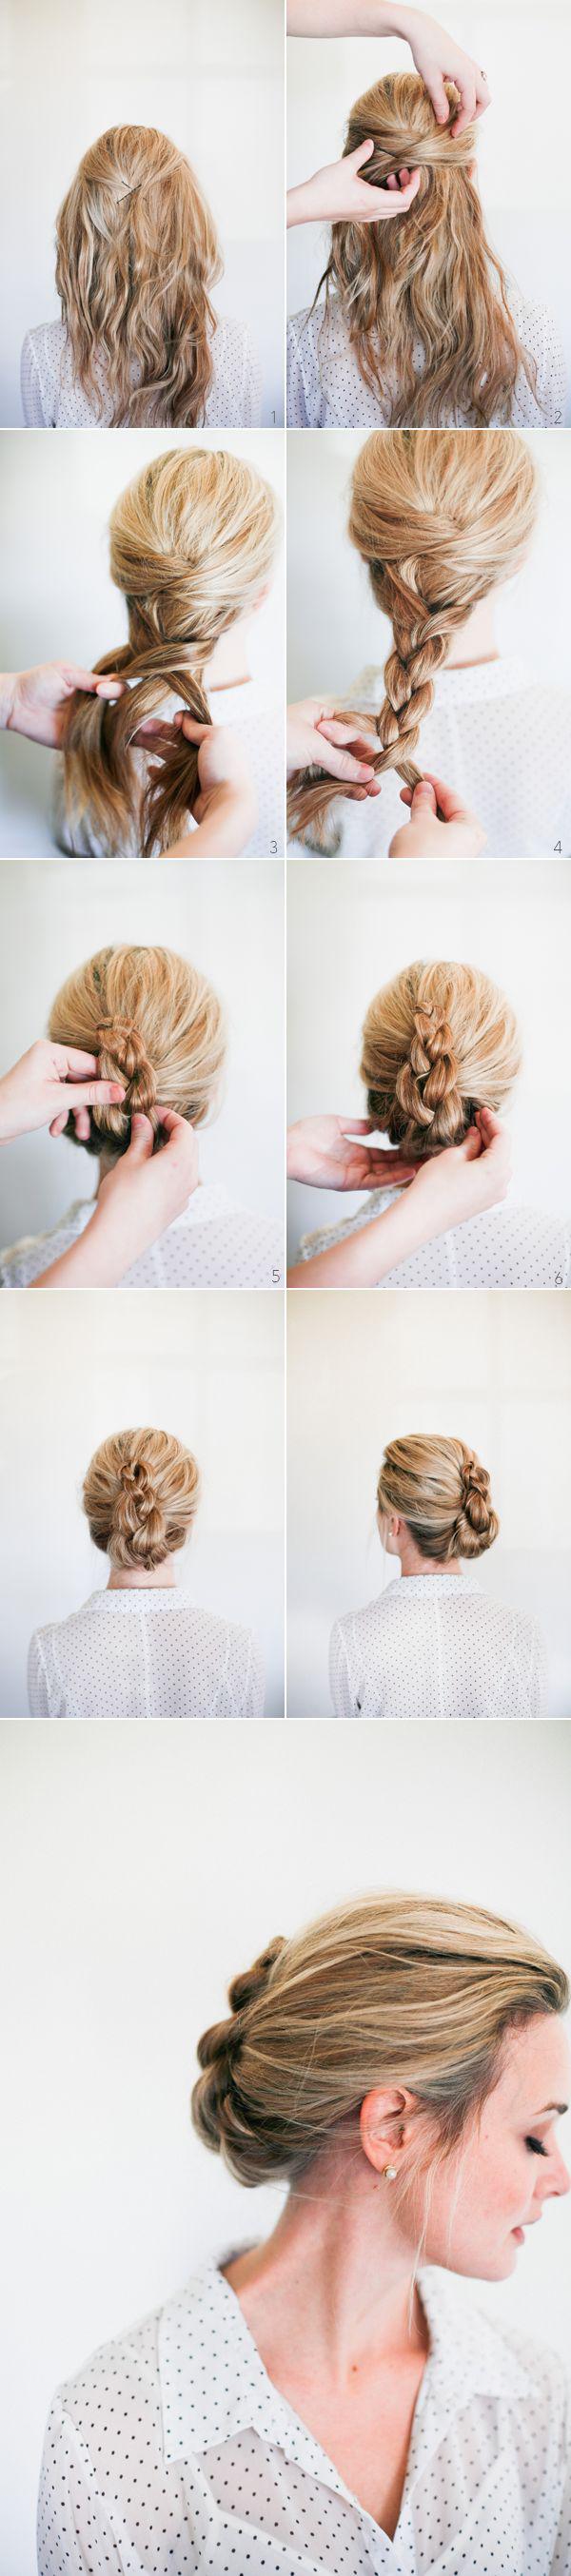 super-easy-step-by-step-hairstyle-ideas.jpg